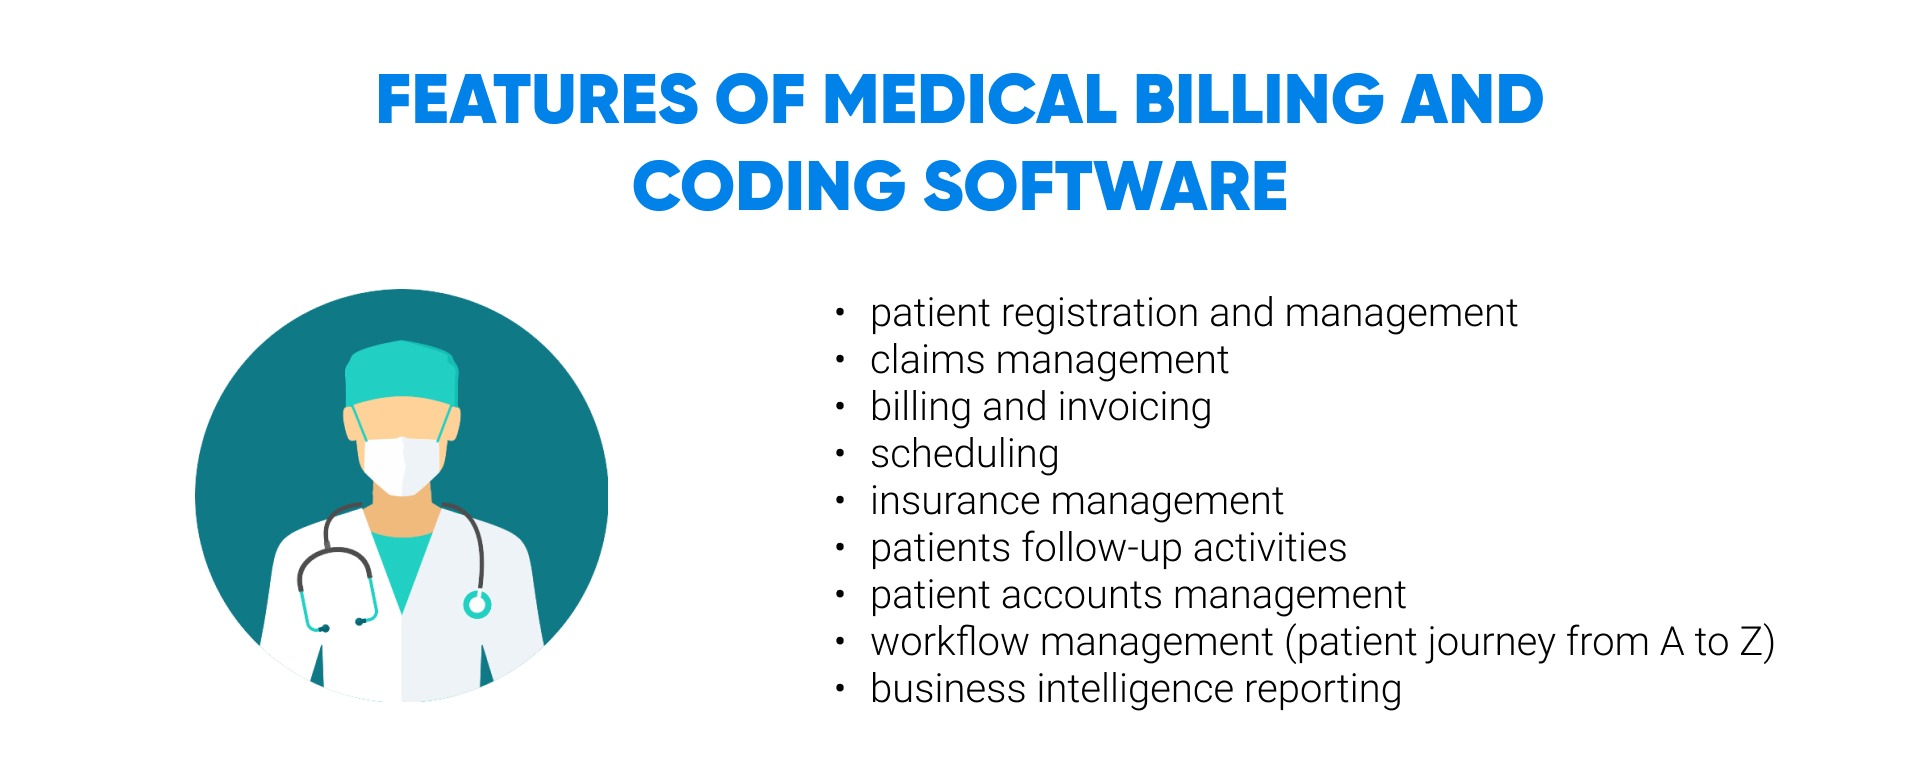 Features of Medical Billing and Coding Software 